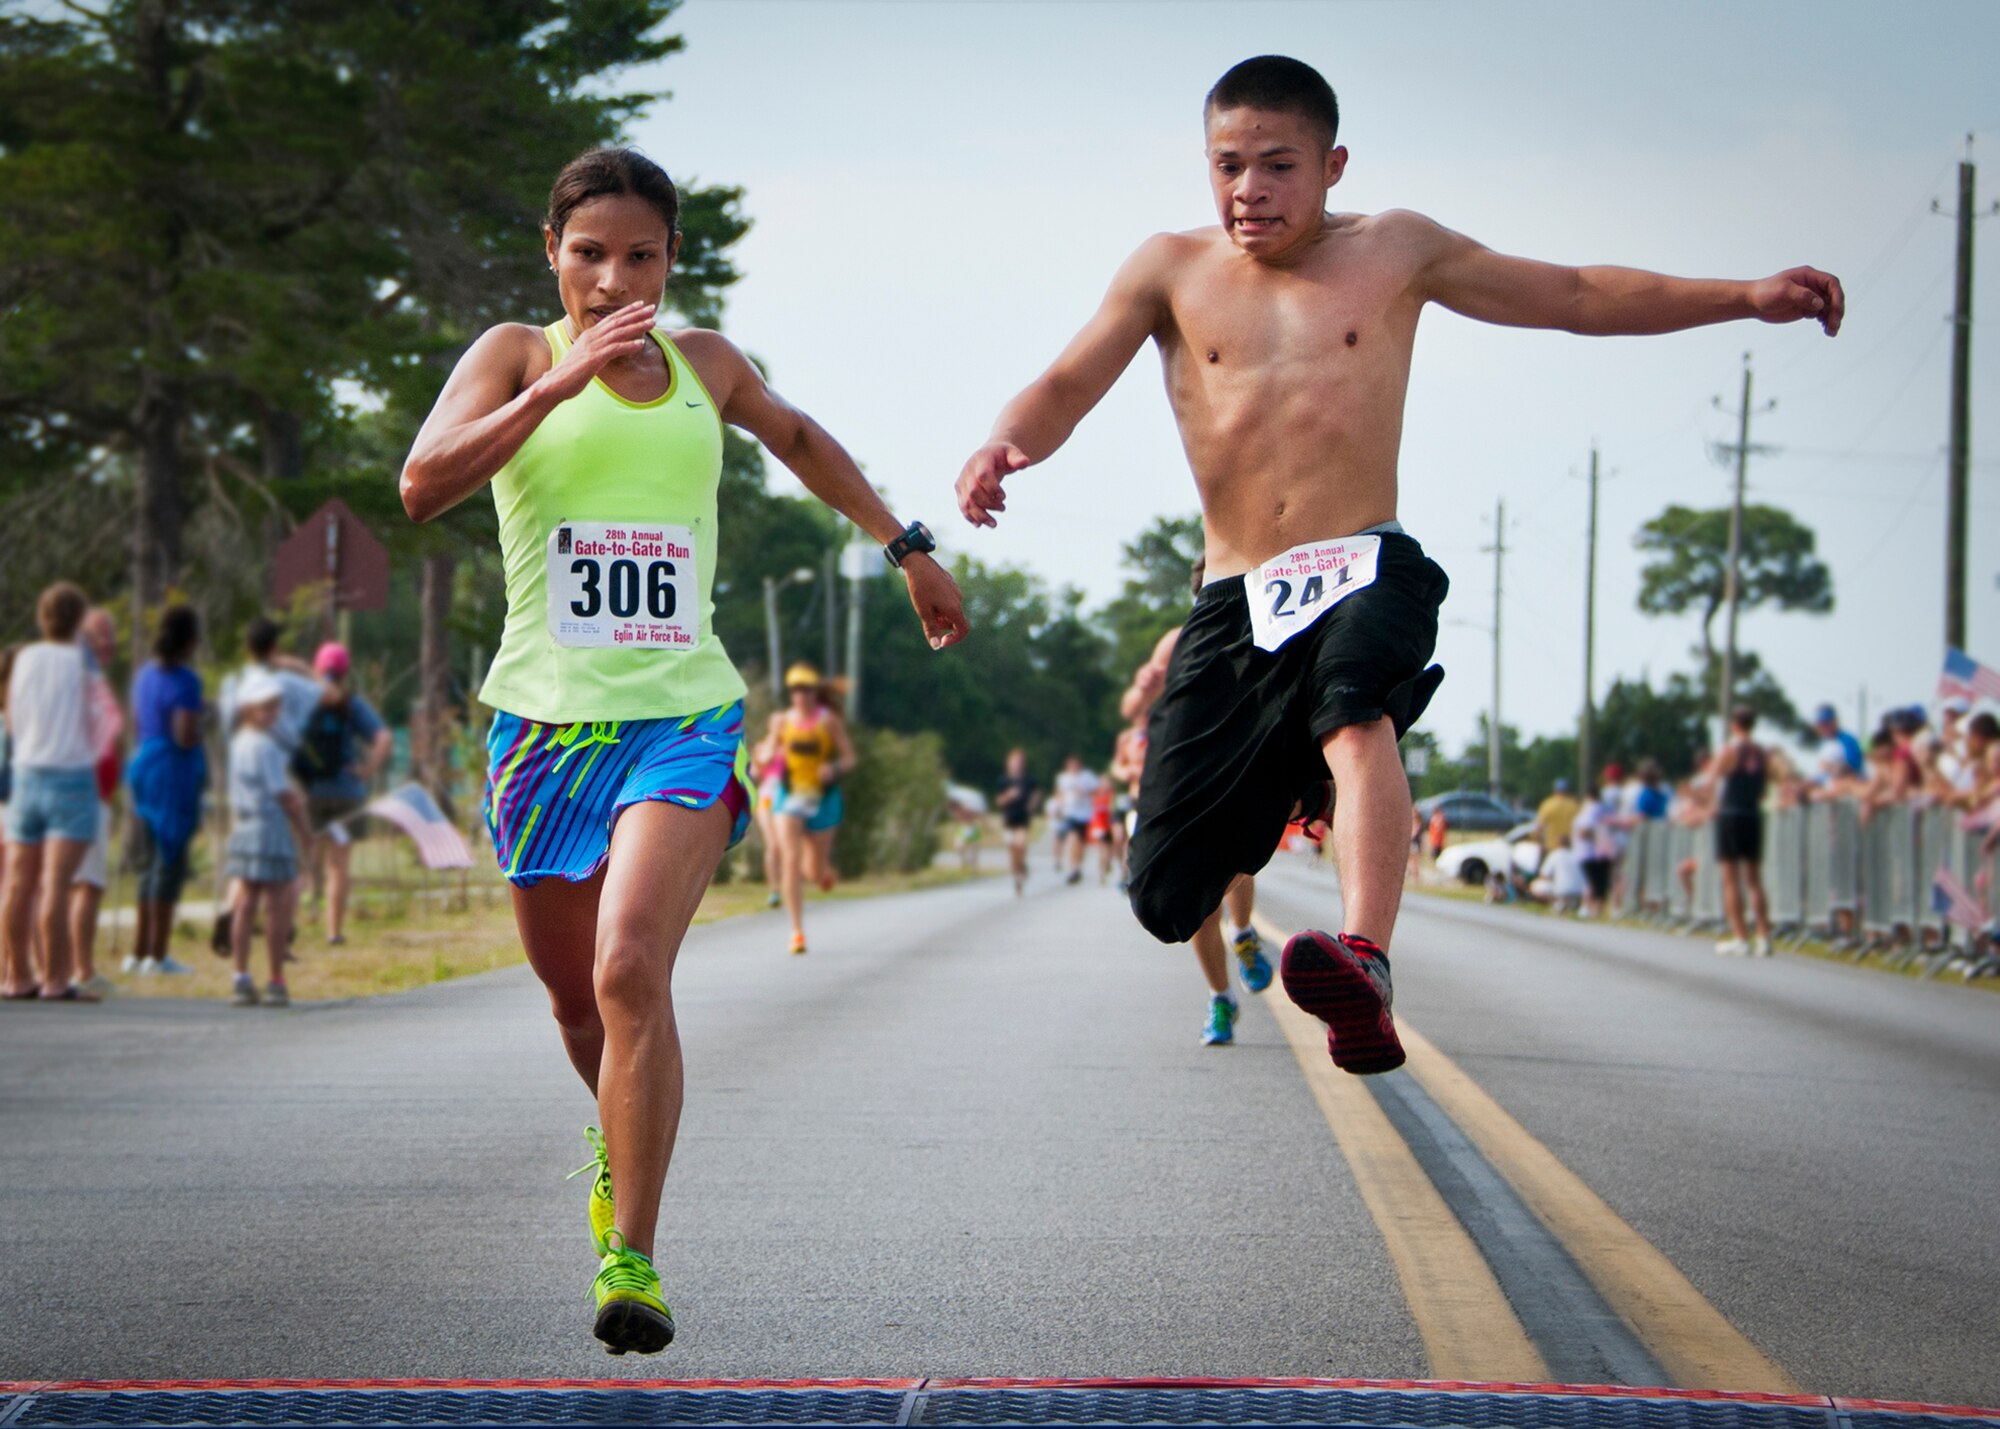 Thais Gutierrez and Matthew Espinoza leap to try and cross the finish line first during the 28th annual Gate-to-Gate Run May 27 at Eglin Air Force Base, Fla. More than 1,500 people participated in the Memorial Day race.  Many of the runners paid their respects by dropping off flowers in front of the All Wars Memorial as they raced by.  (U.S. Air Force photo/Samuel King Jr.)